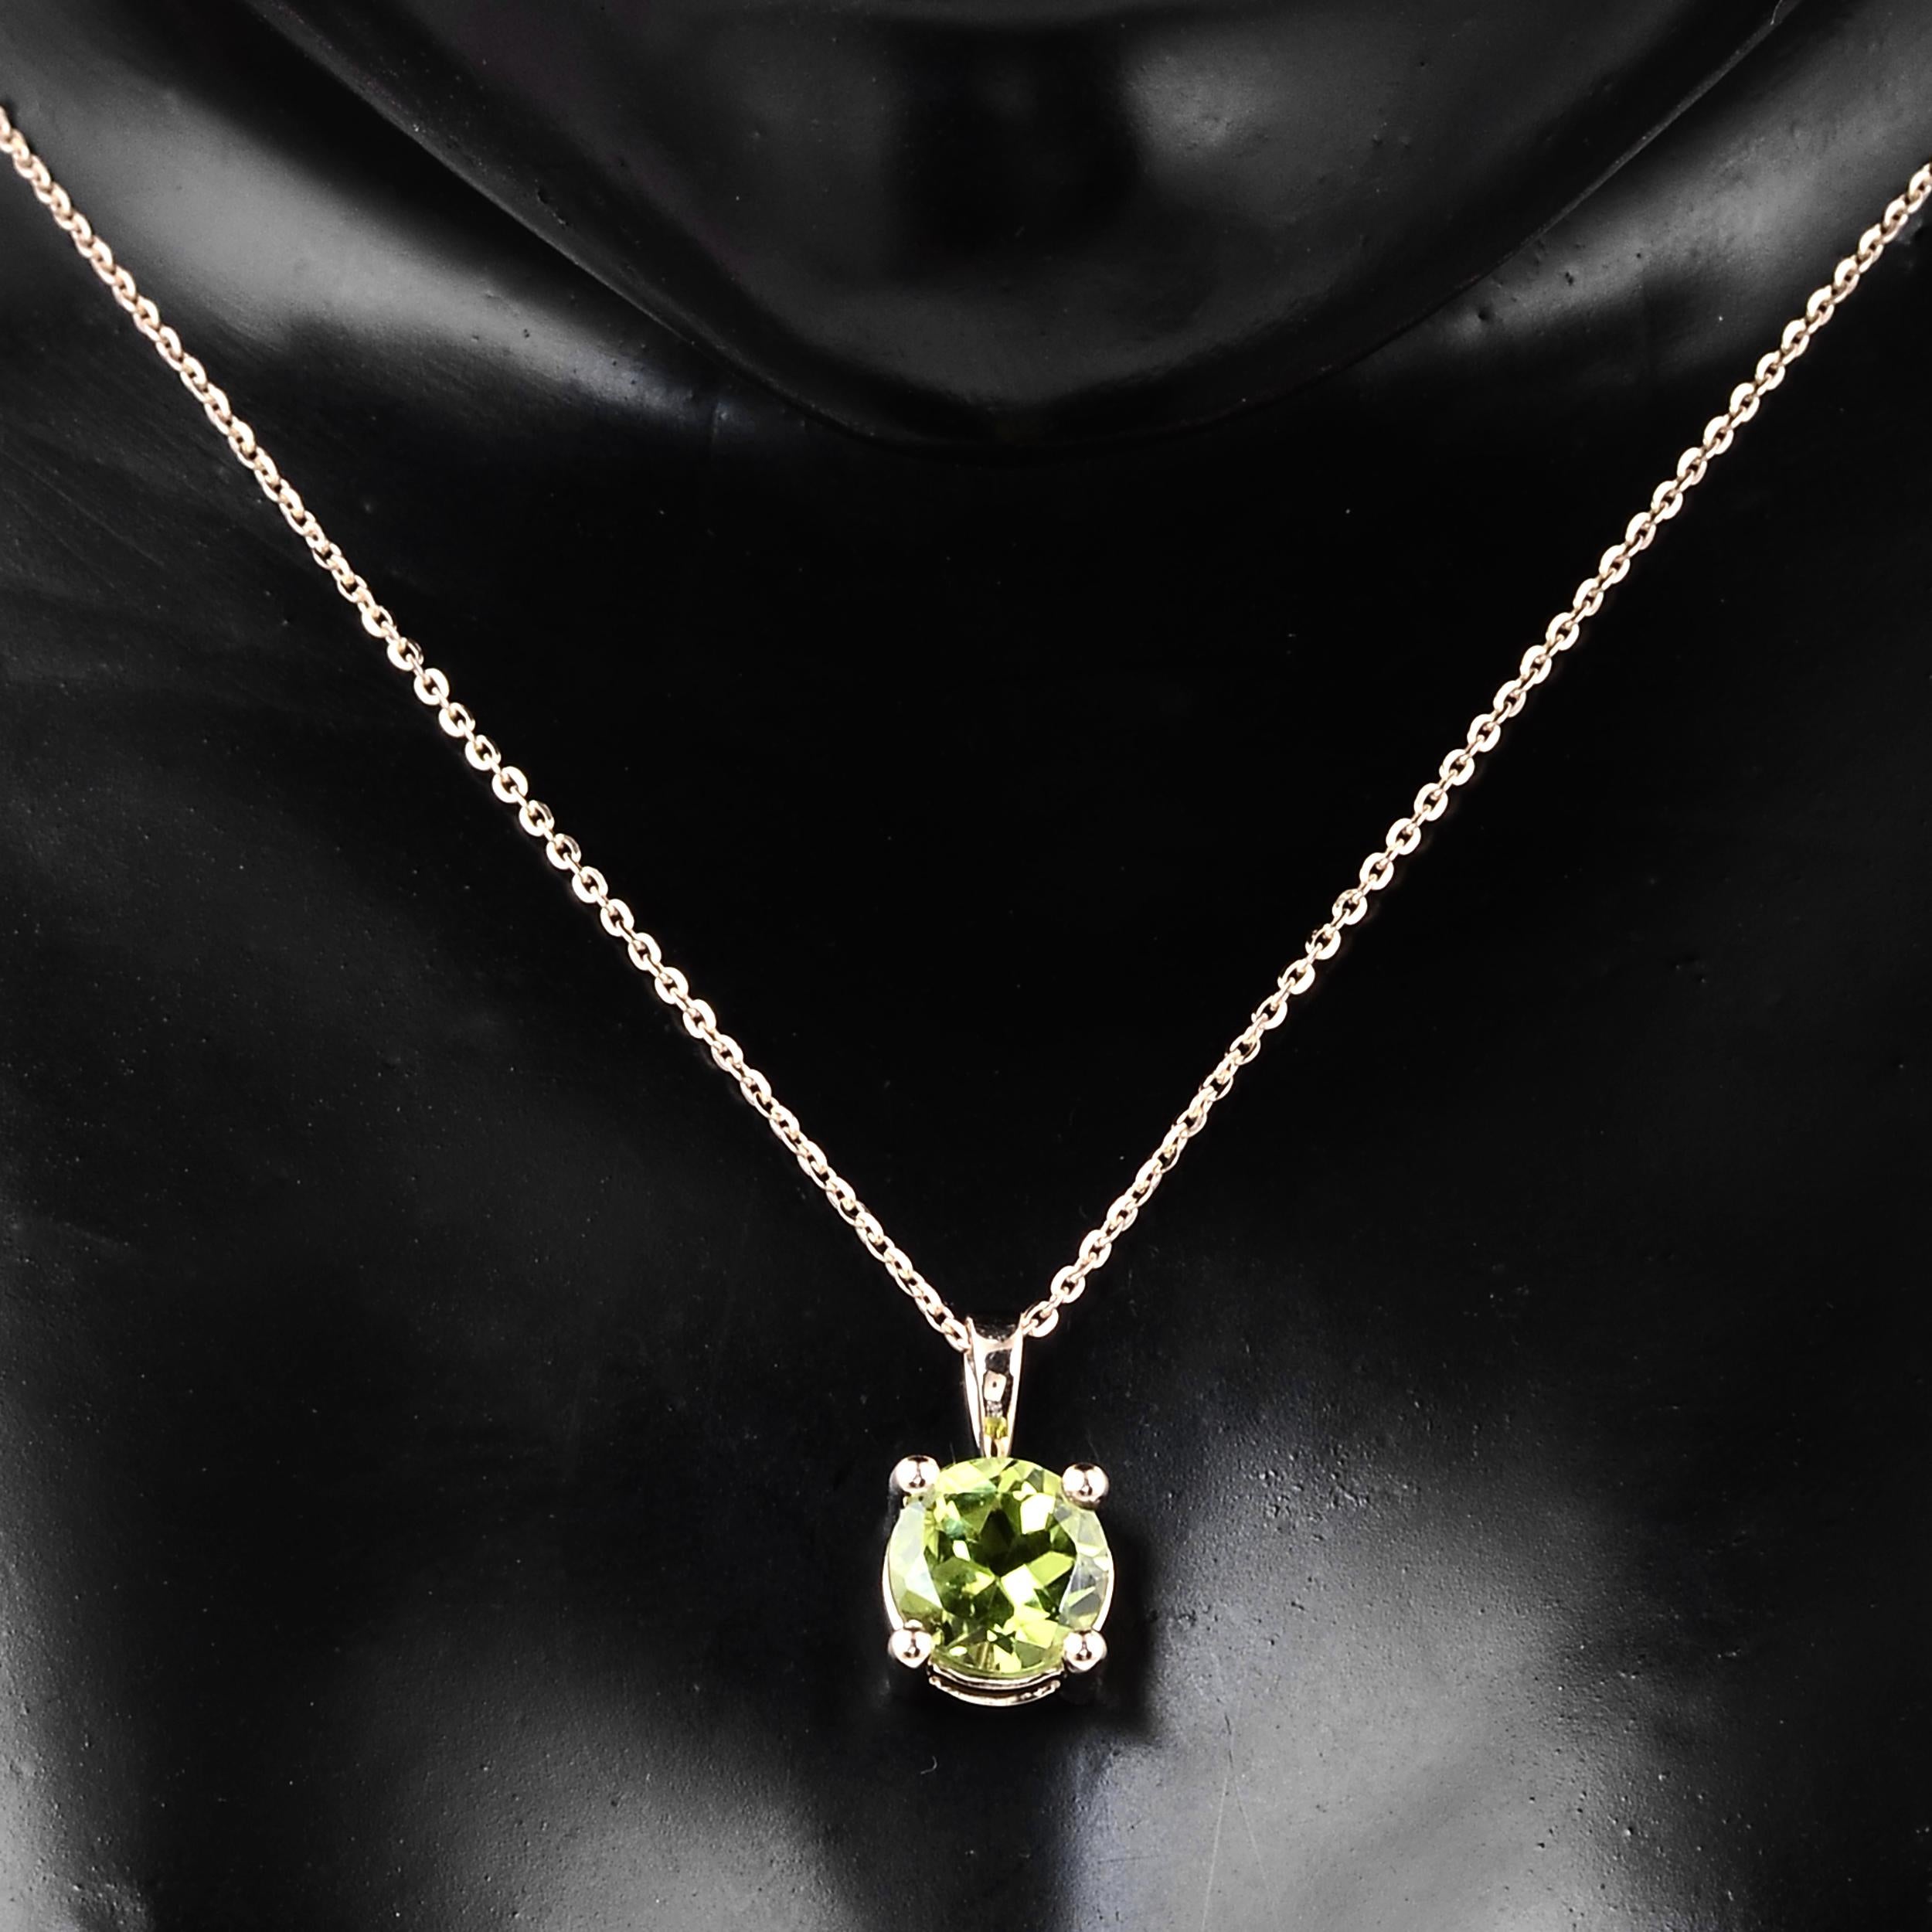 Introducing our Serene Harmony Peridot Pendant, a sublime creation  that encapsulates the soothing essence of the August birthstone. This pendant, a testament to nature's tranquility, is an exquisite addition to our Harmony in Green